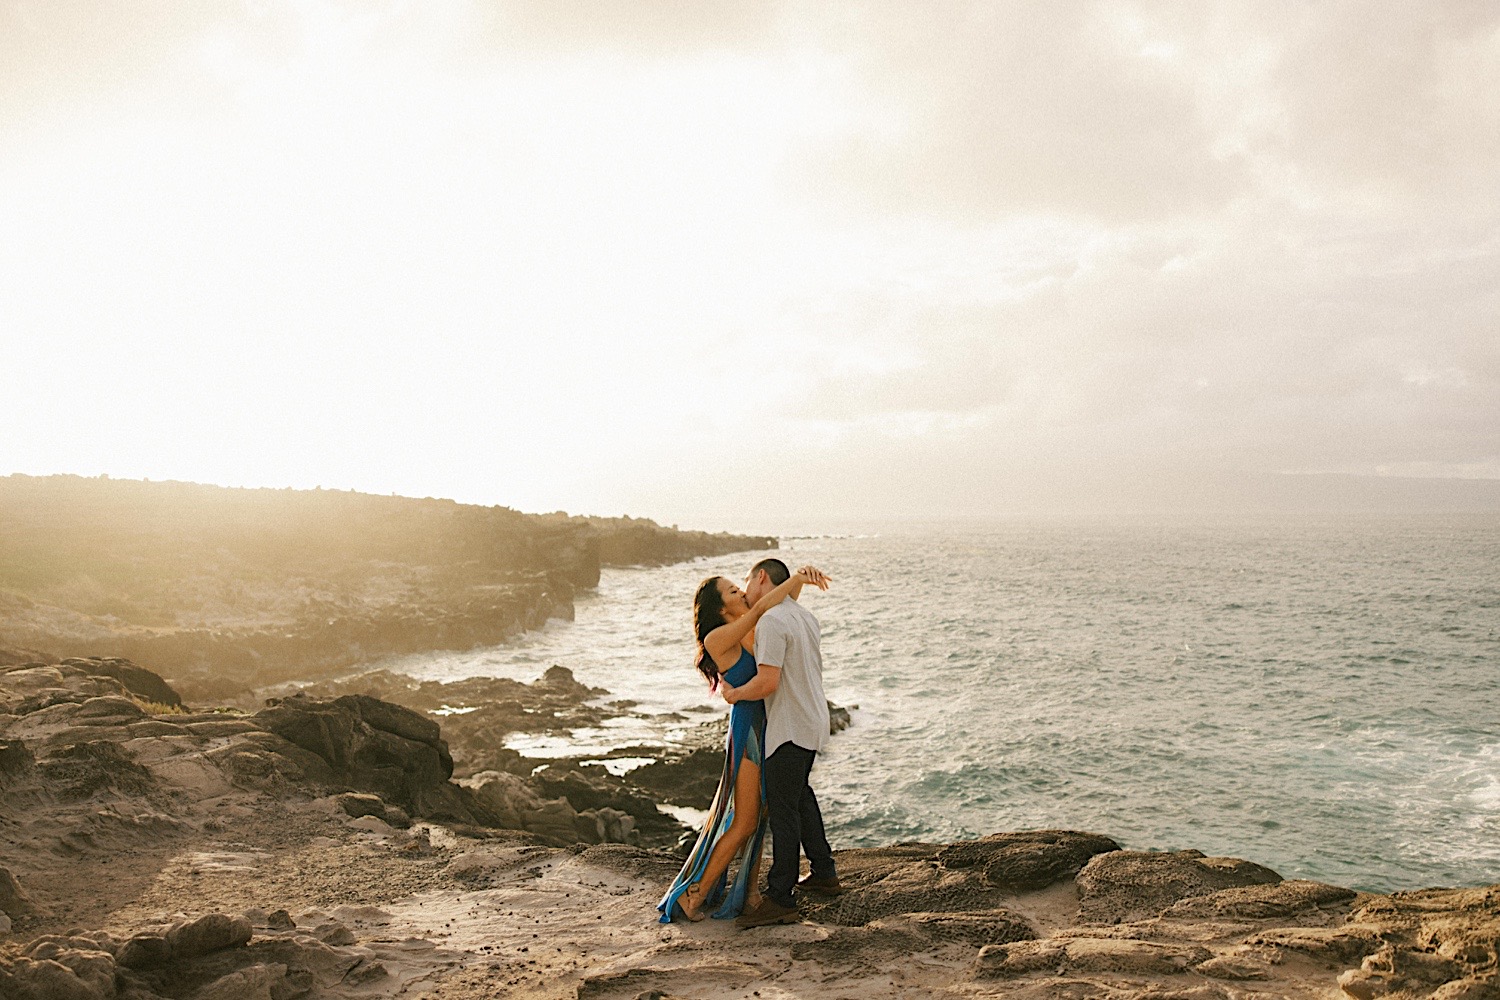 During their engagement session in Hawaii a couple kiss and embrace while on a rocky cliff that looks out over the ocean during sunset